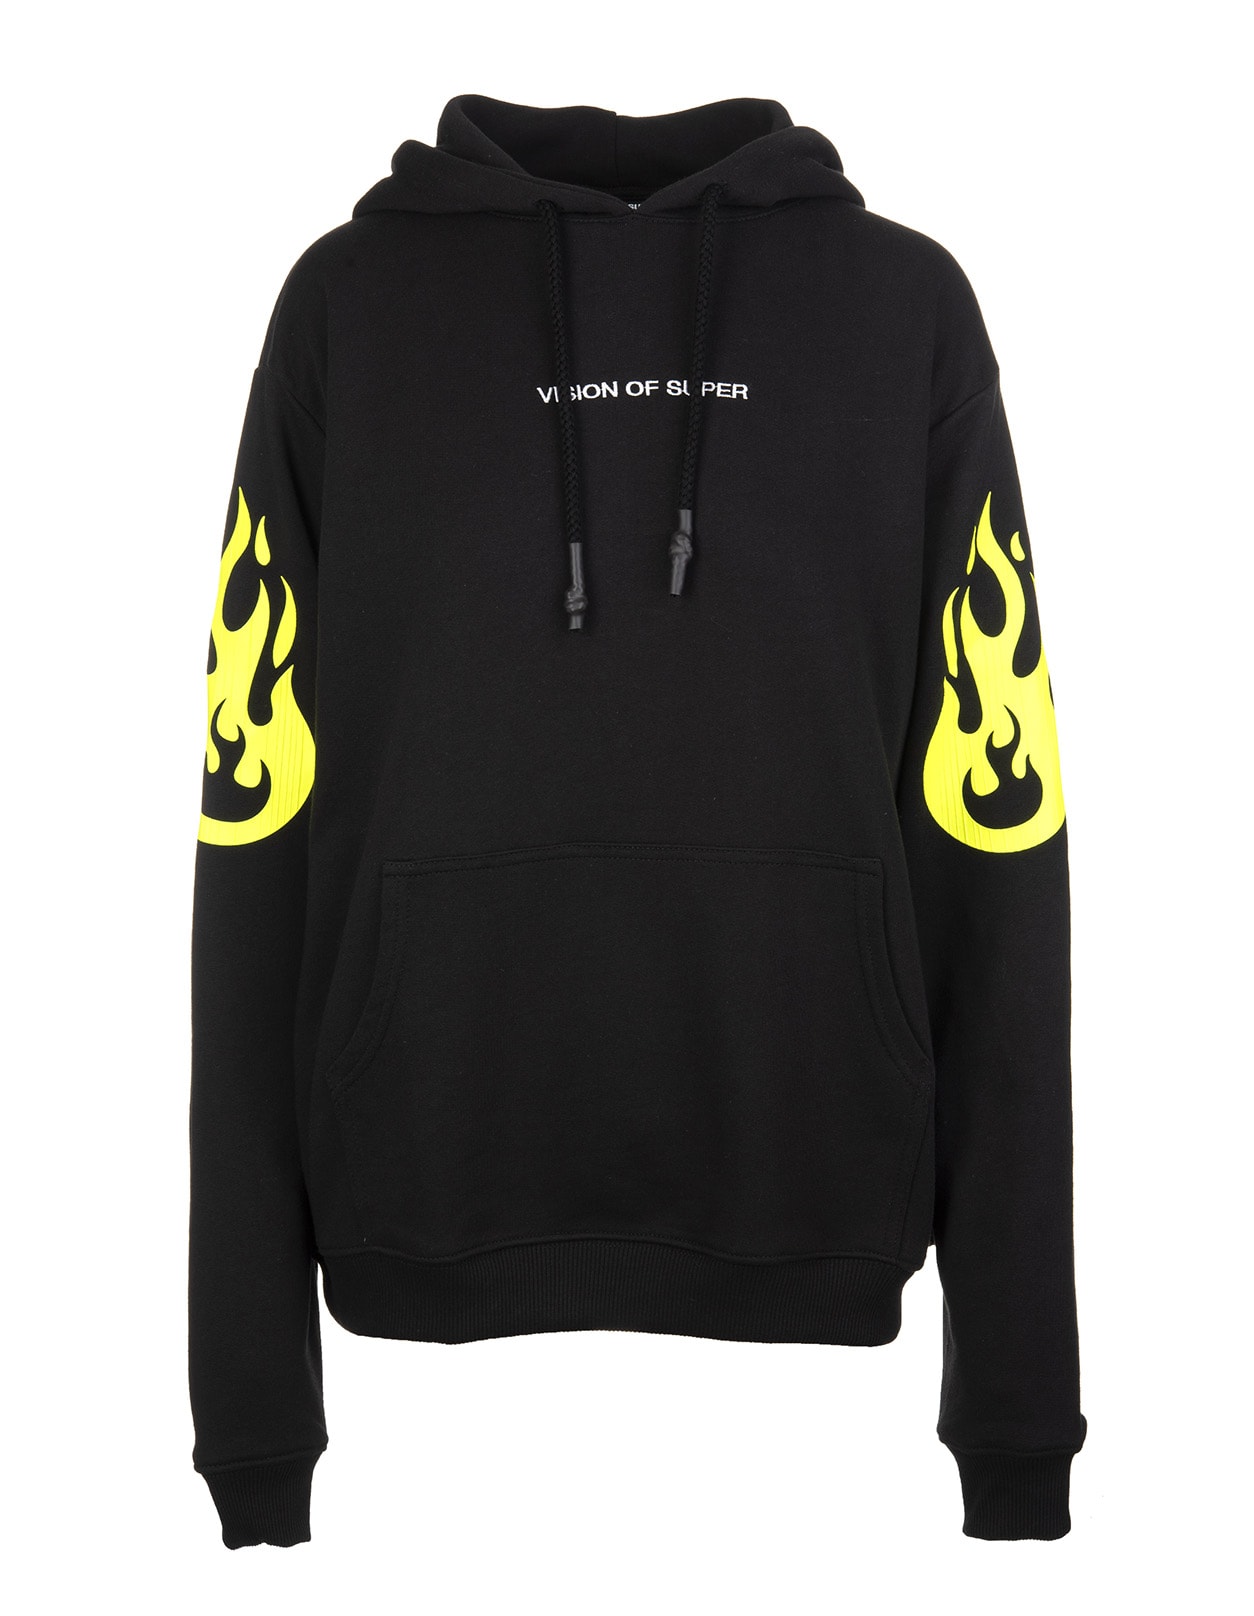 Vision of Super Man Black Hoodie With Yellow Flame